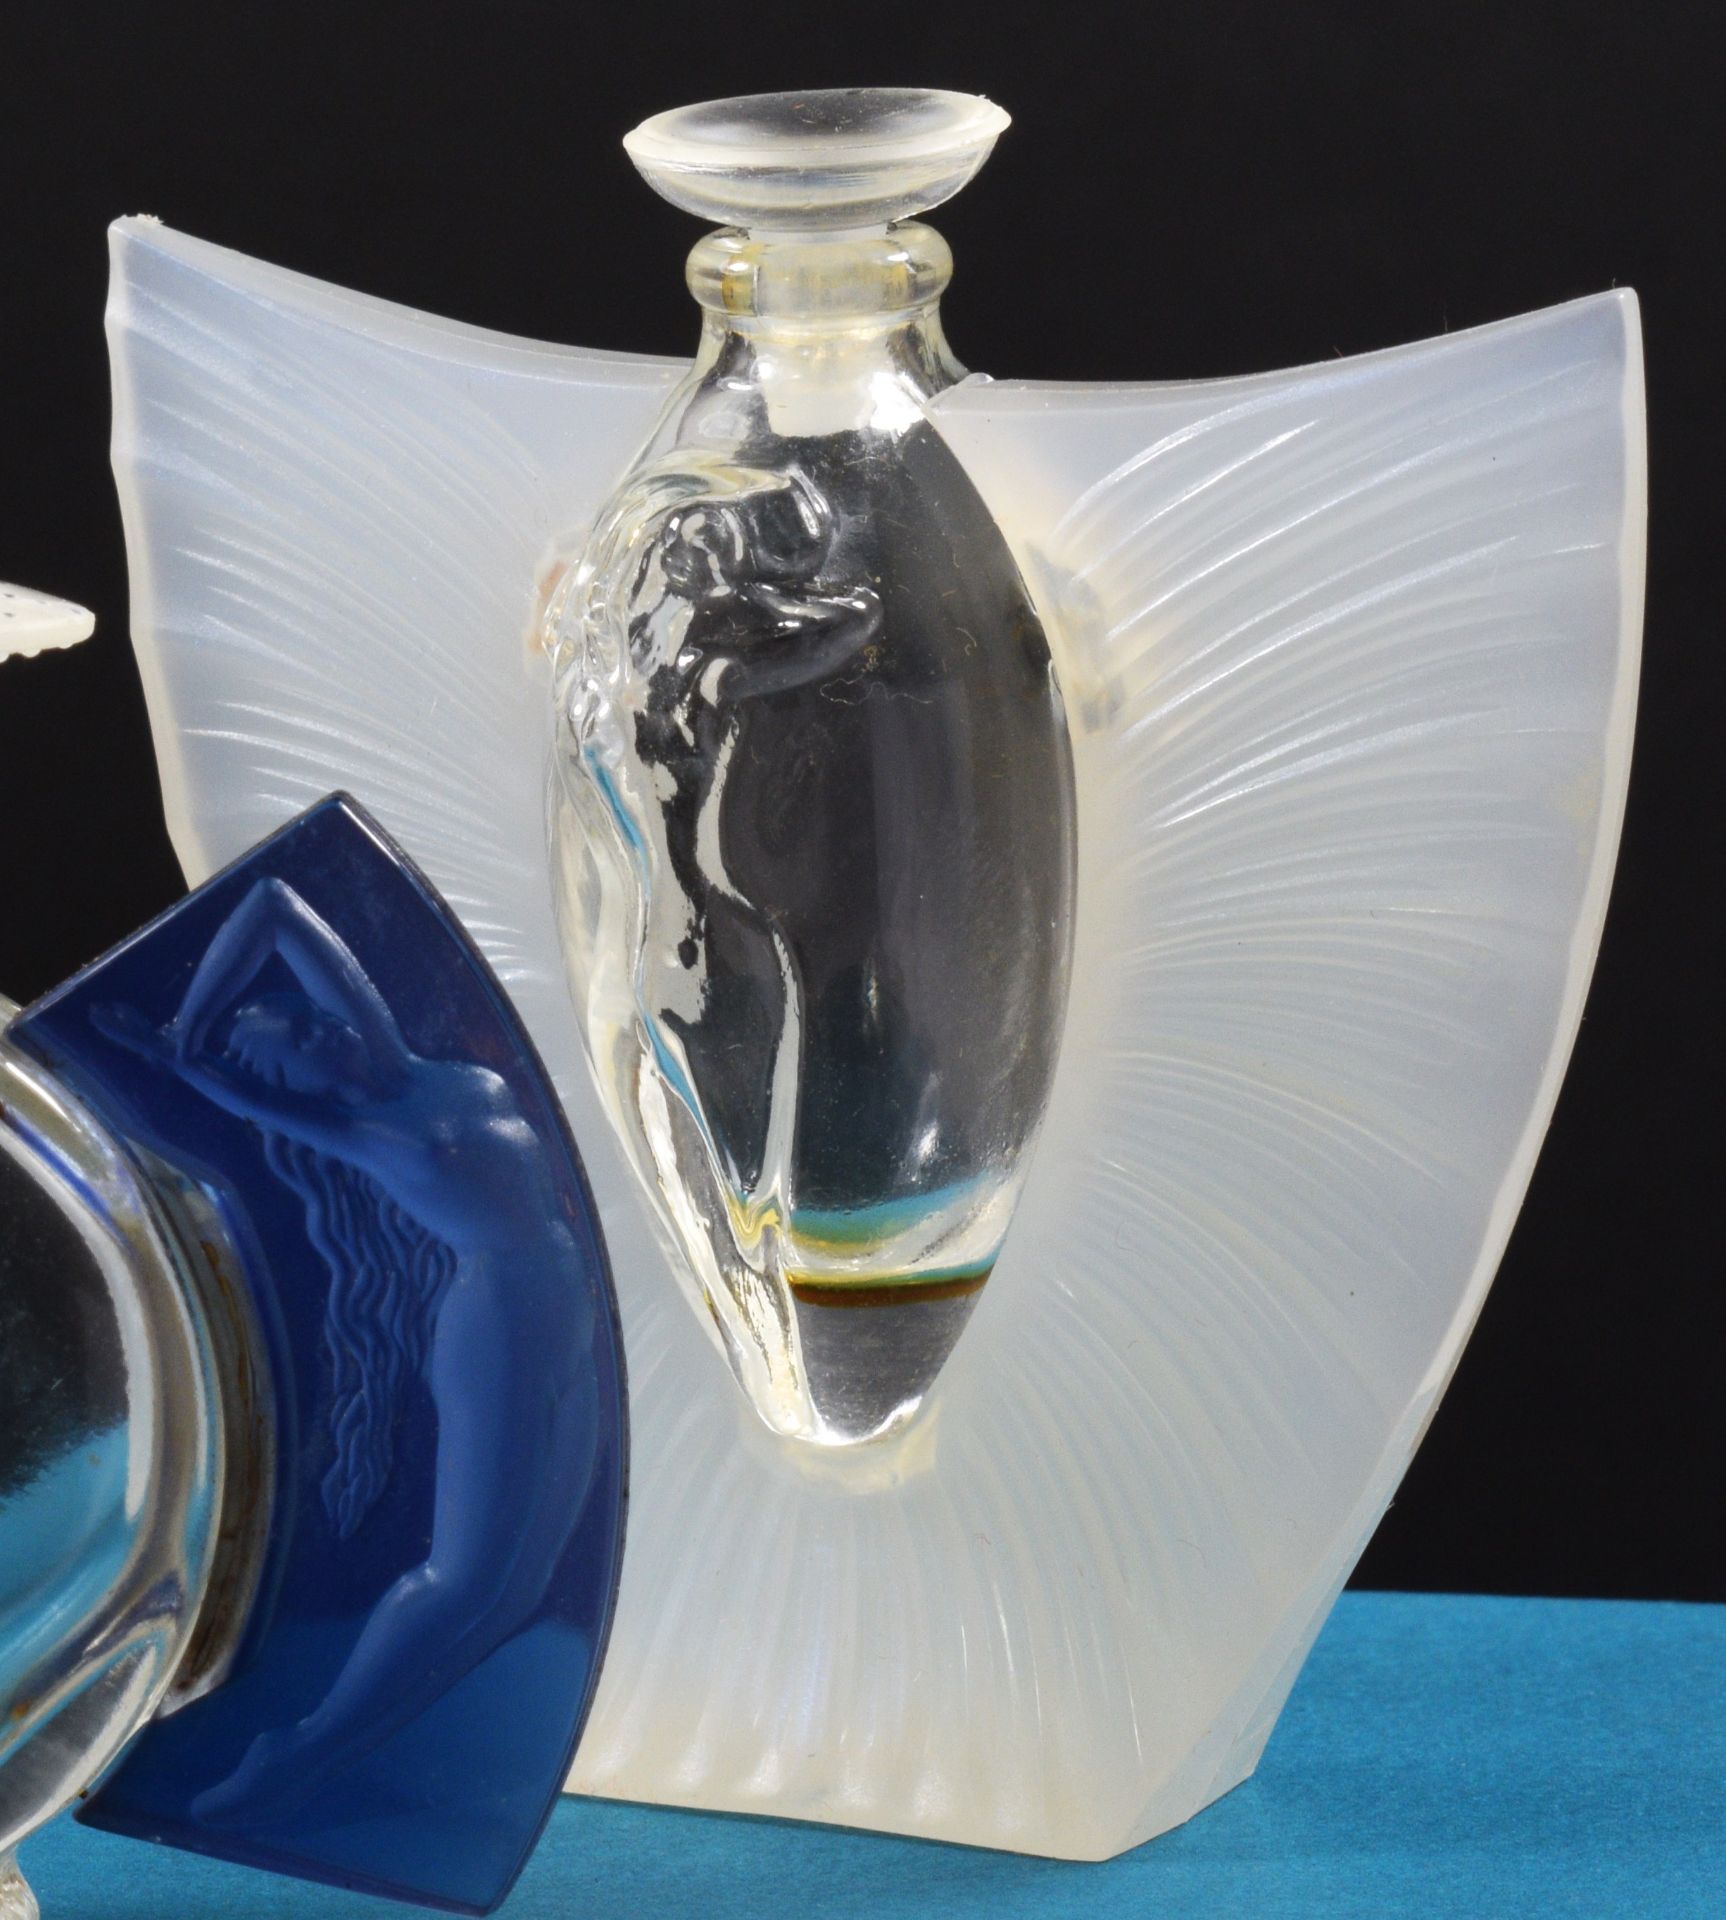 Lalique "Les Flacons Miniatures", perfume bottles, 1998, 1999, 2000 edition, cased with display card - Image 4 of 9